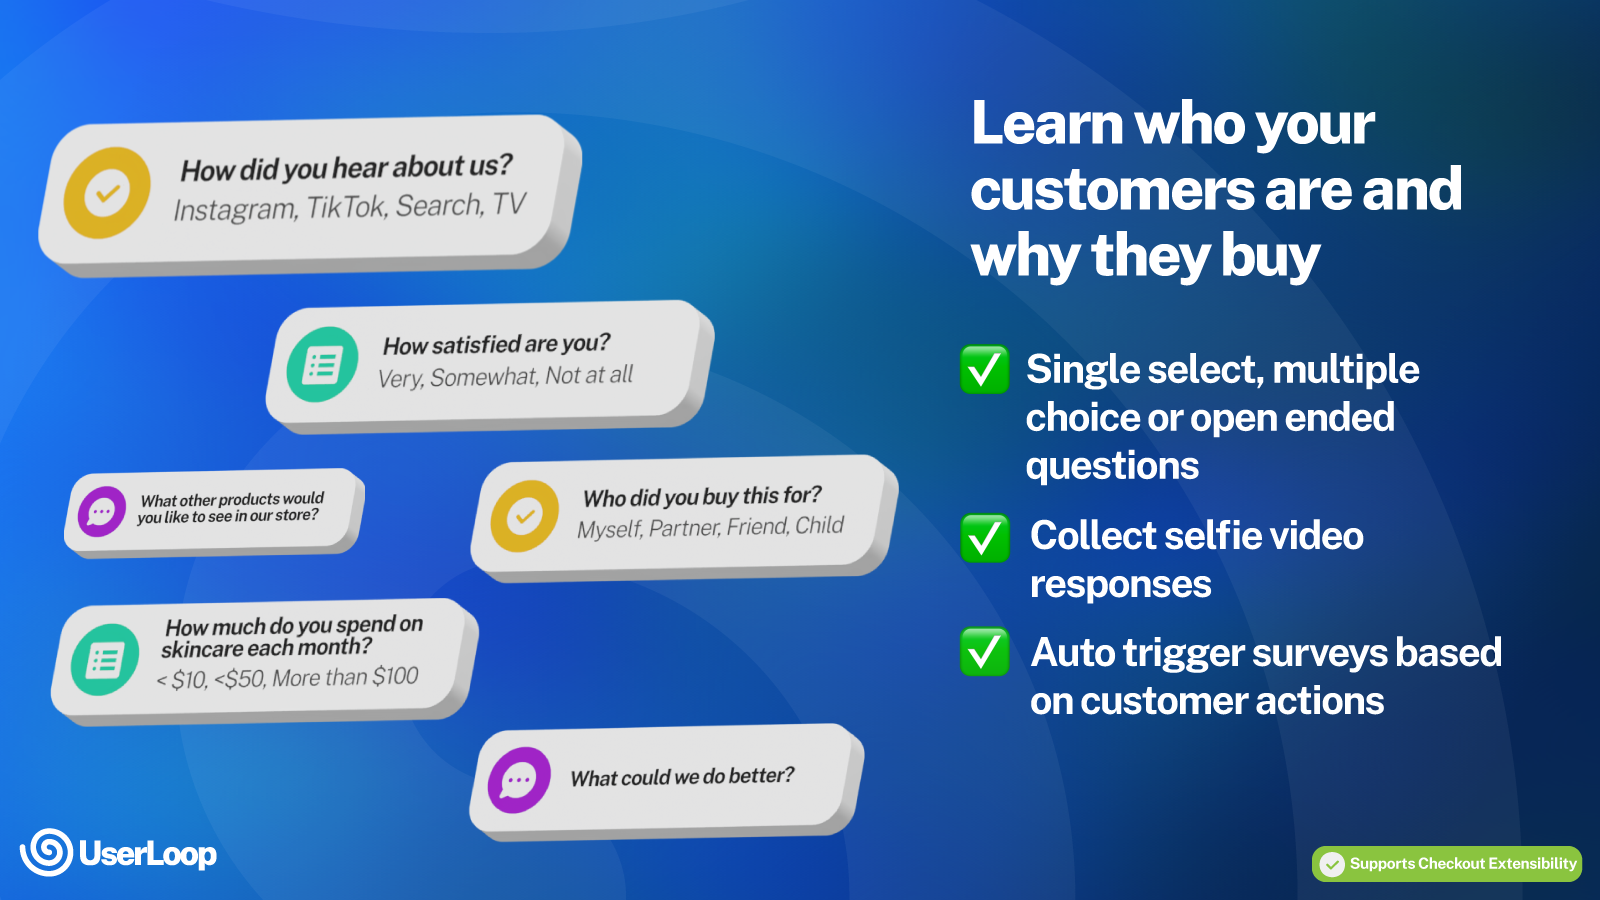 Learn who your customers are and why they buy